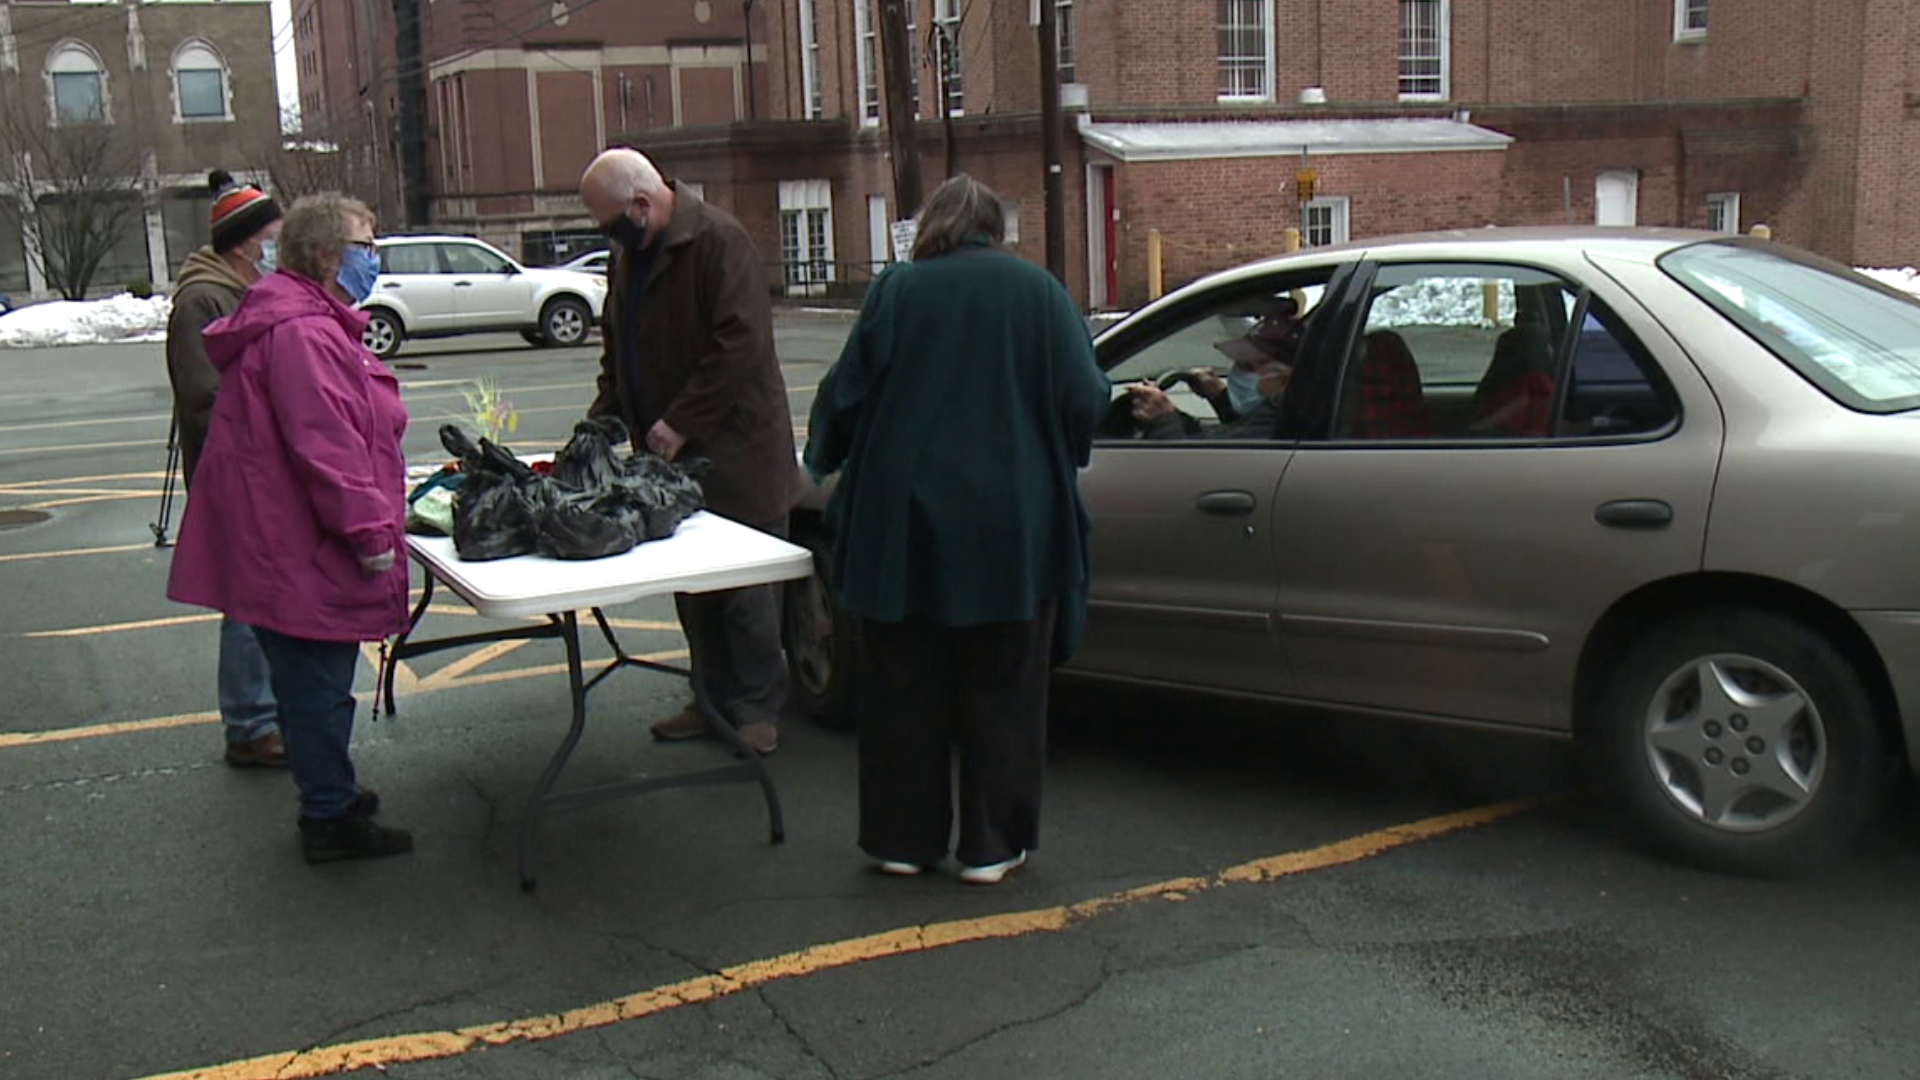 The collaborative effort between churches distributes free meals once a month.